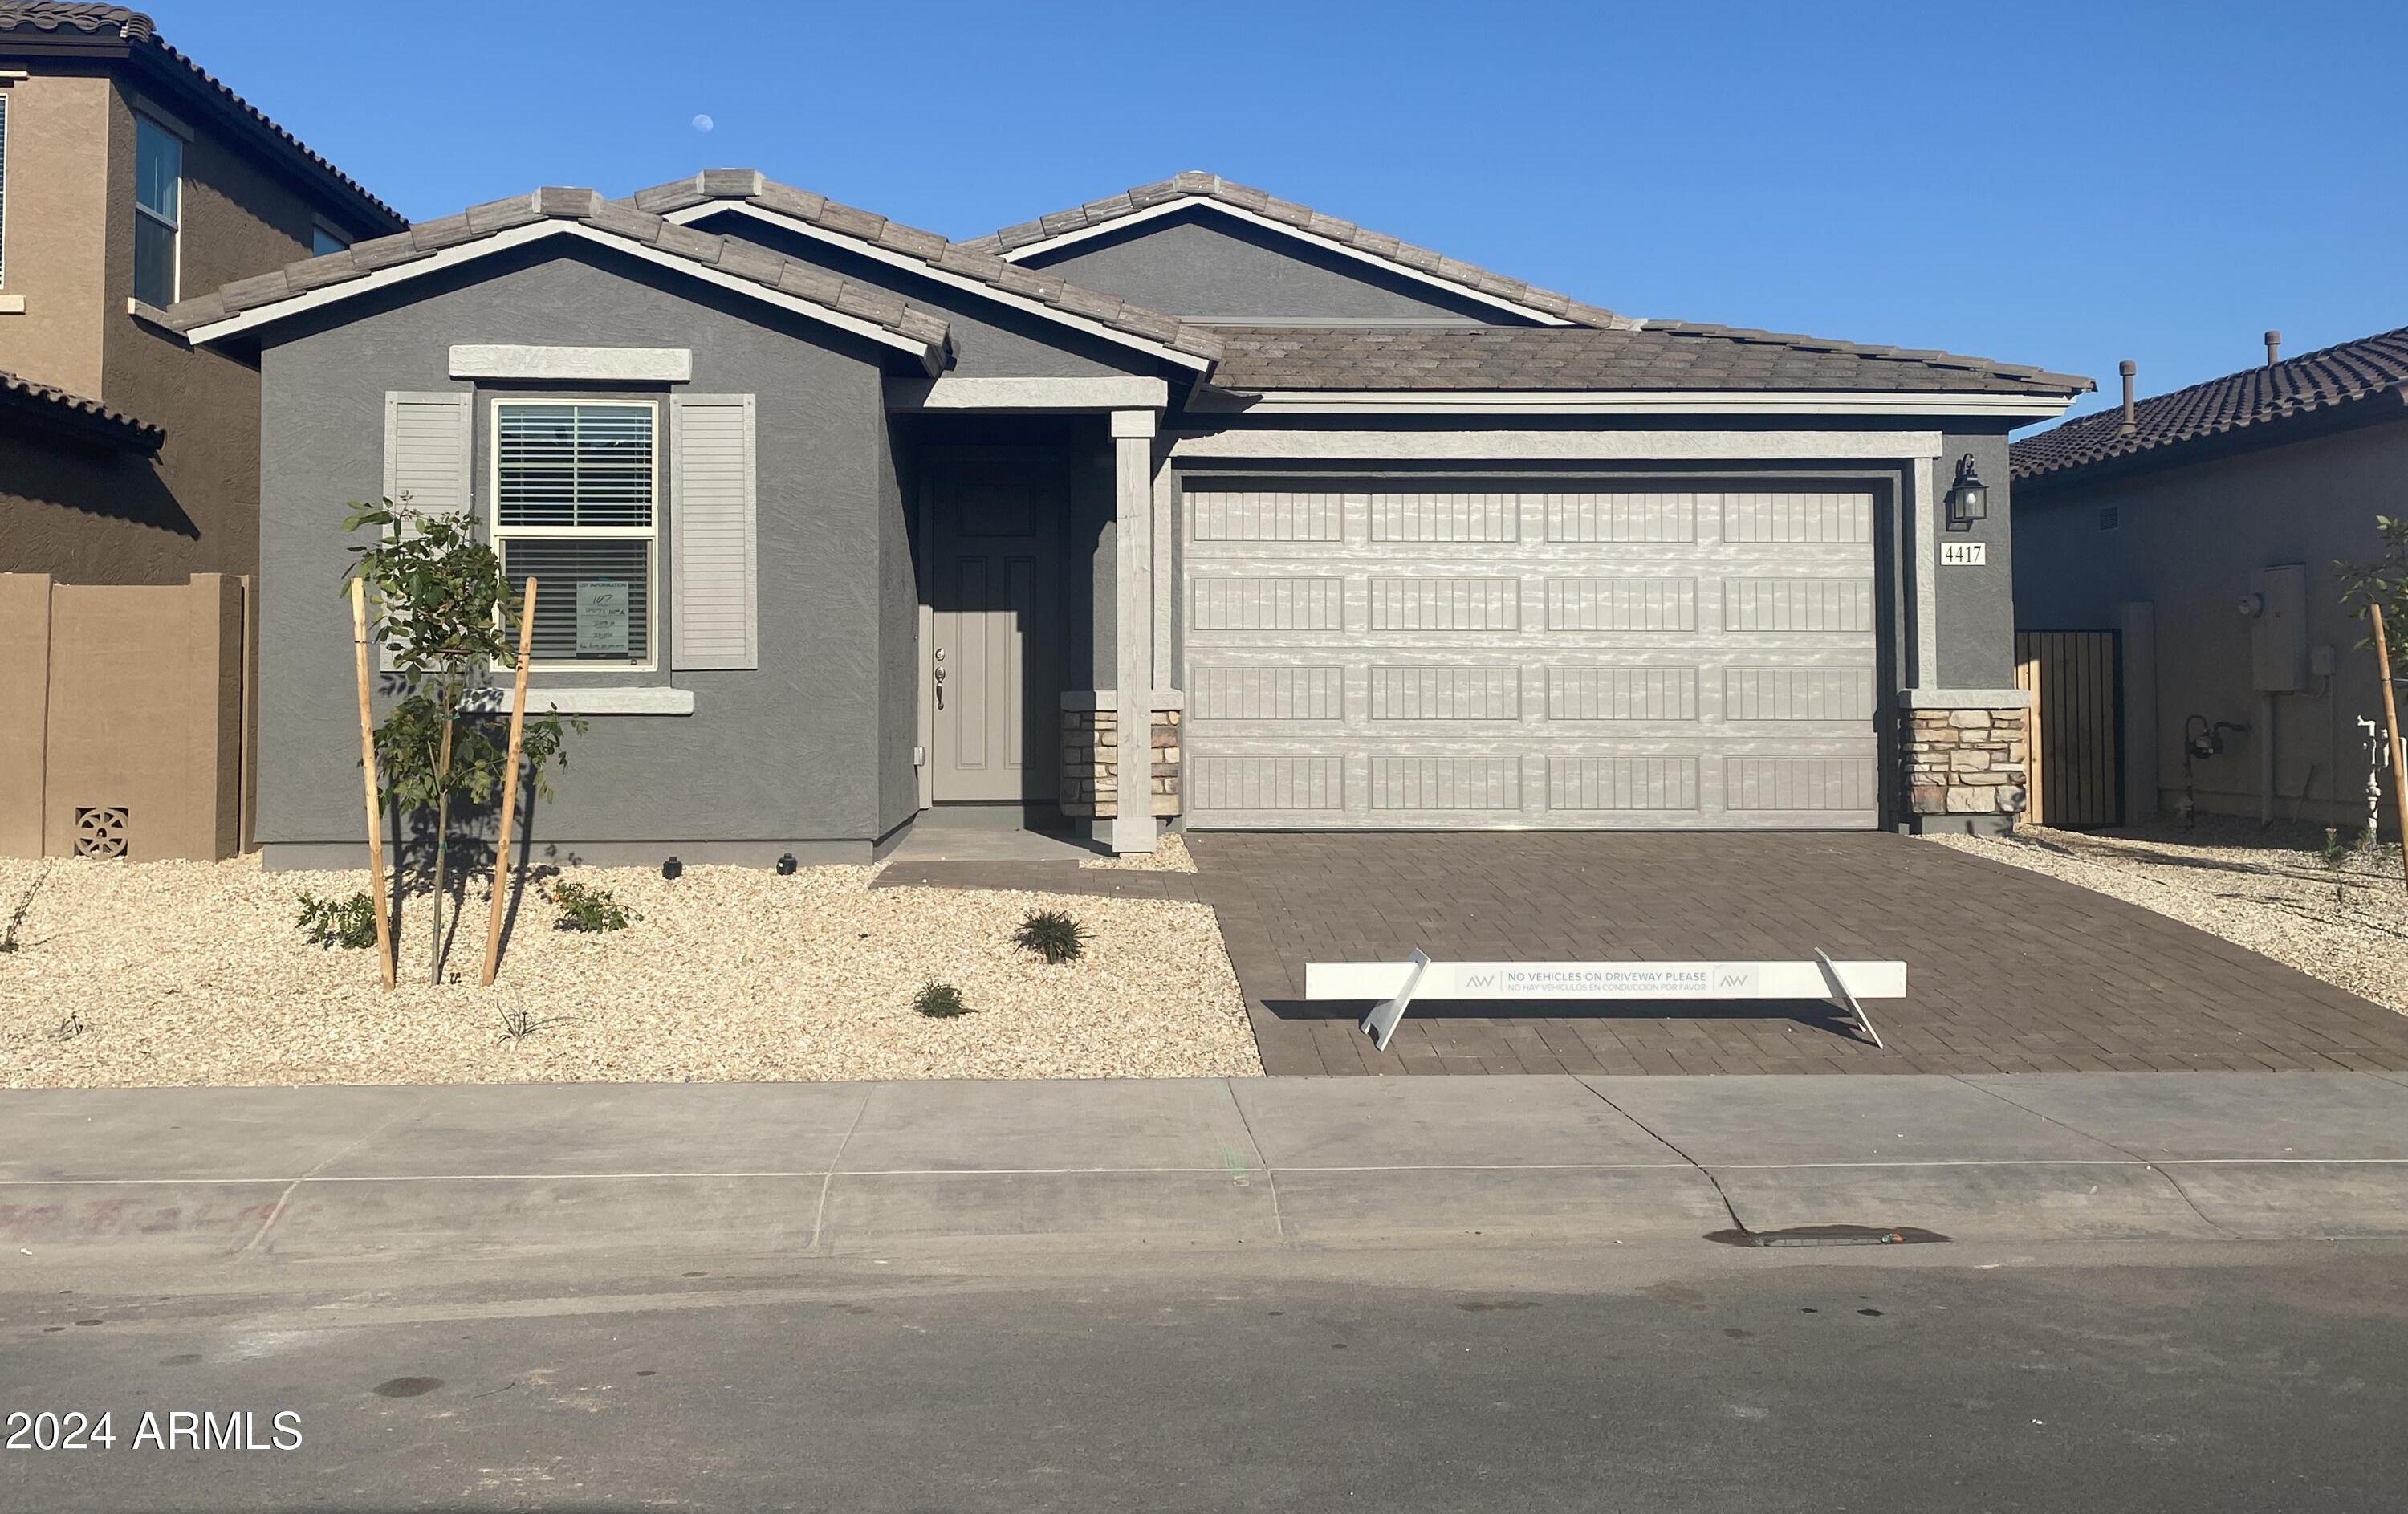 Photo one of 4417 S 108Th Ave Tolleson AZ 85353 | MLS 6680672